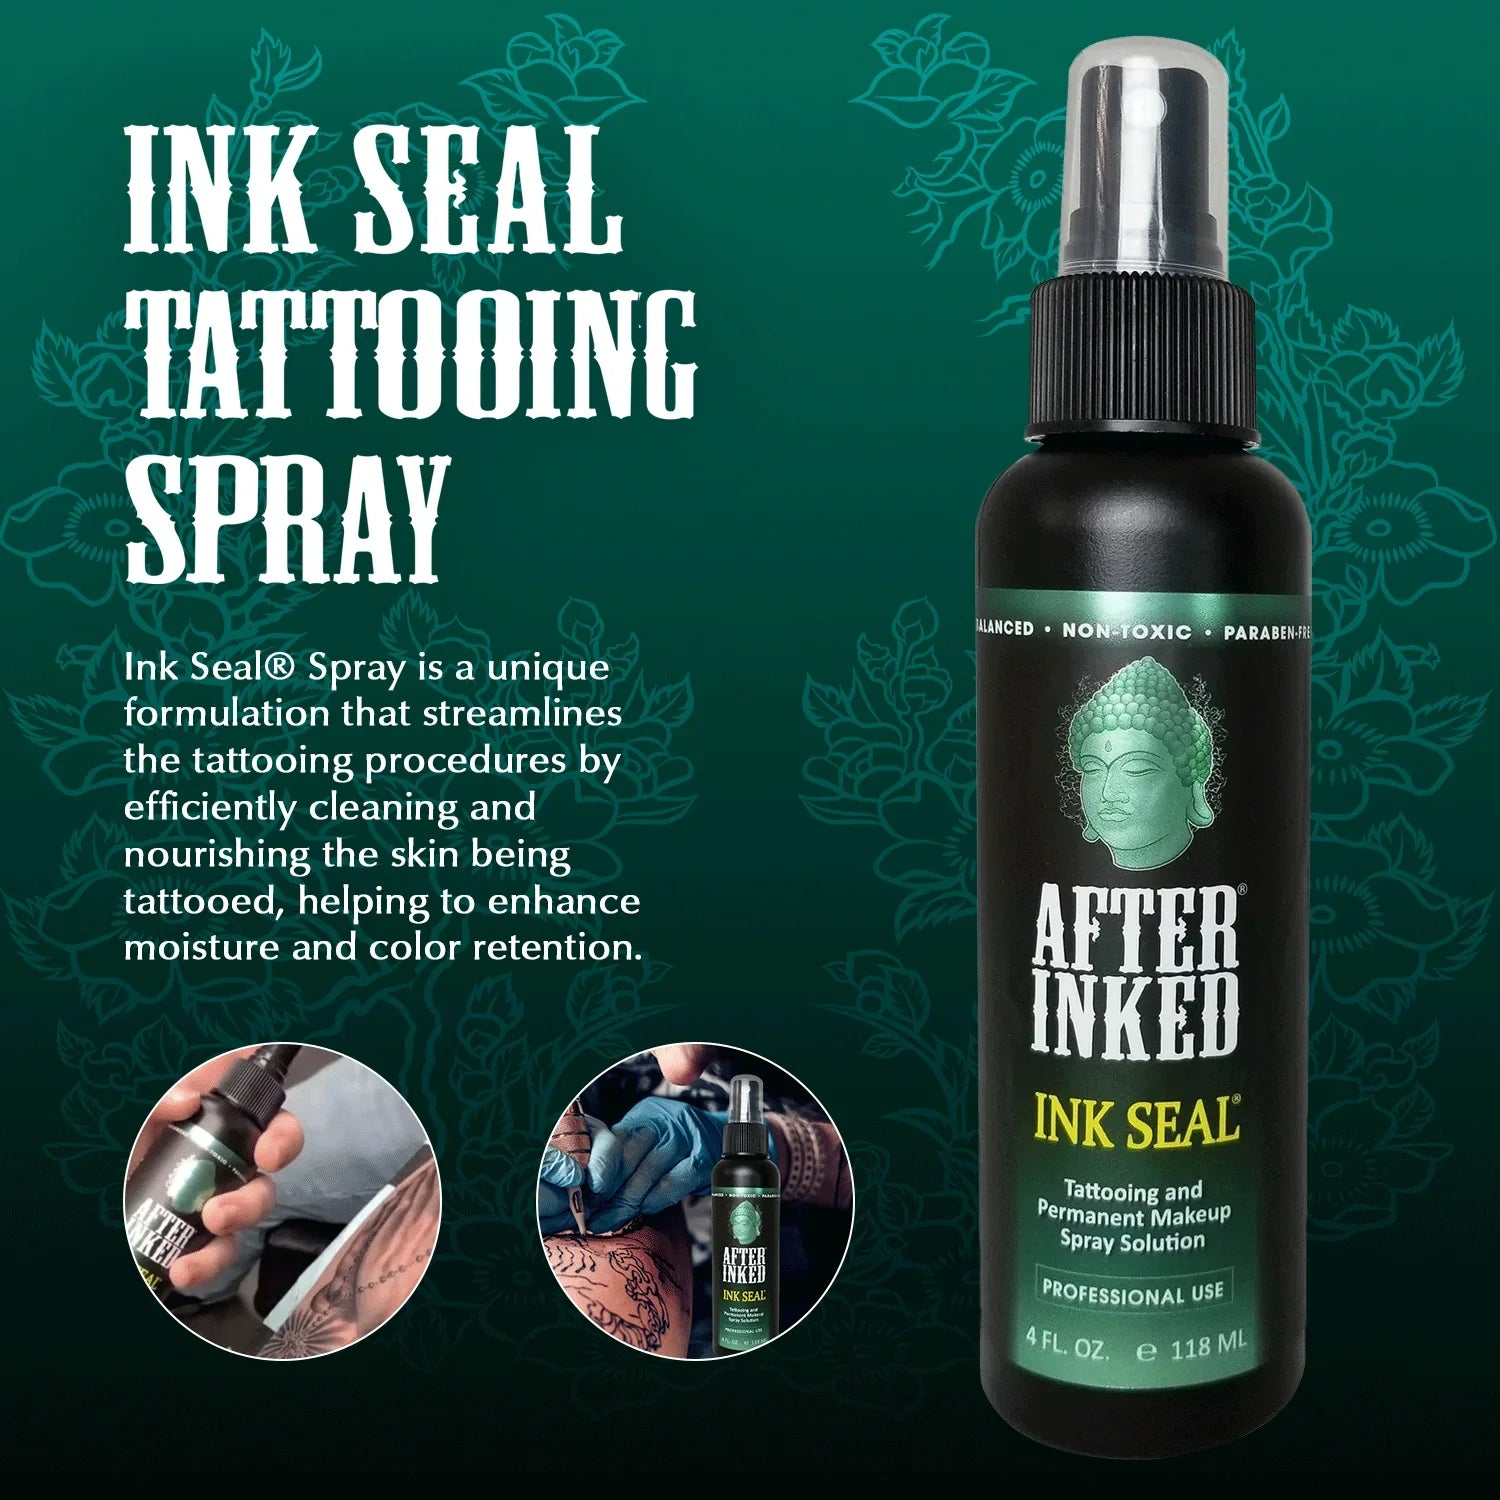 After Inked Ink Seal Tattoo Spray 4 oz benefits